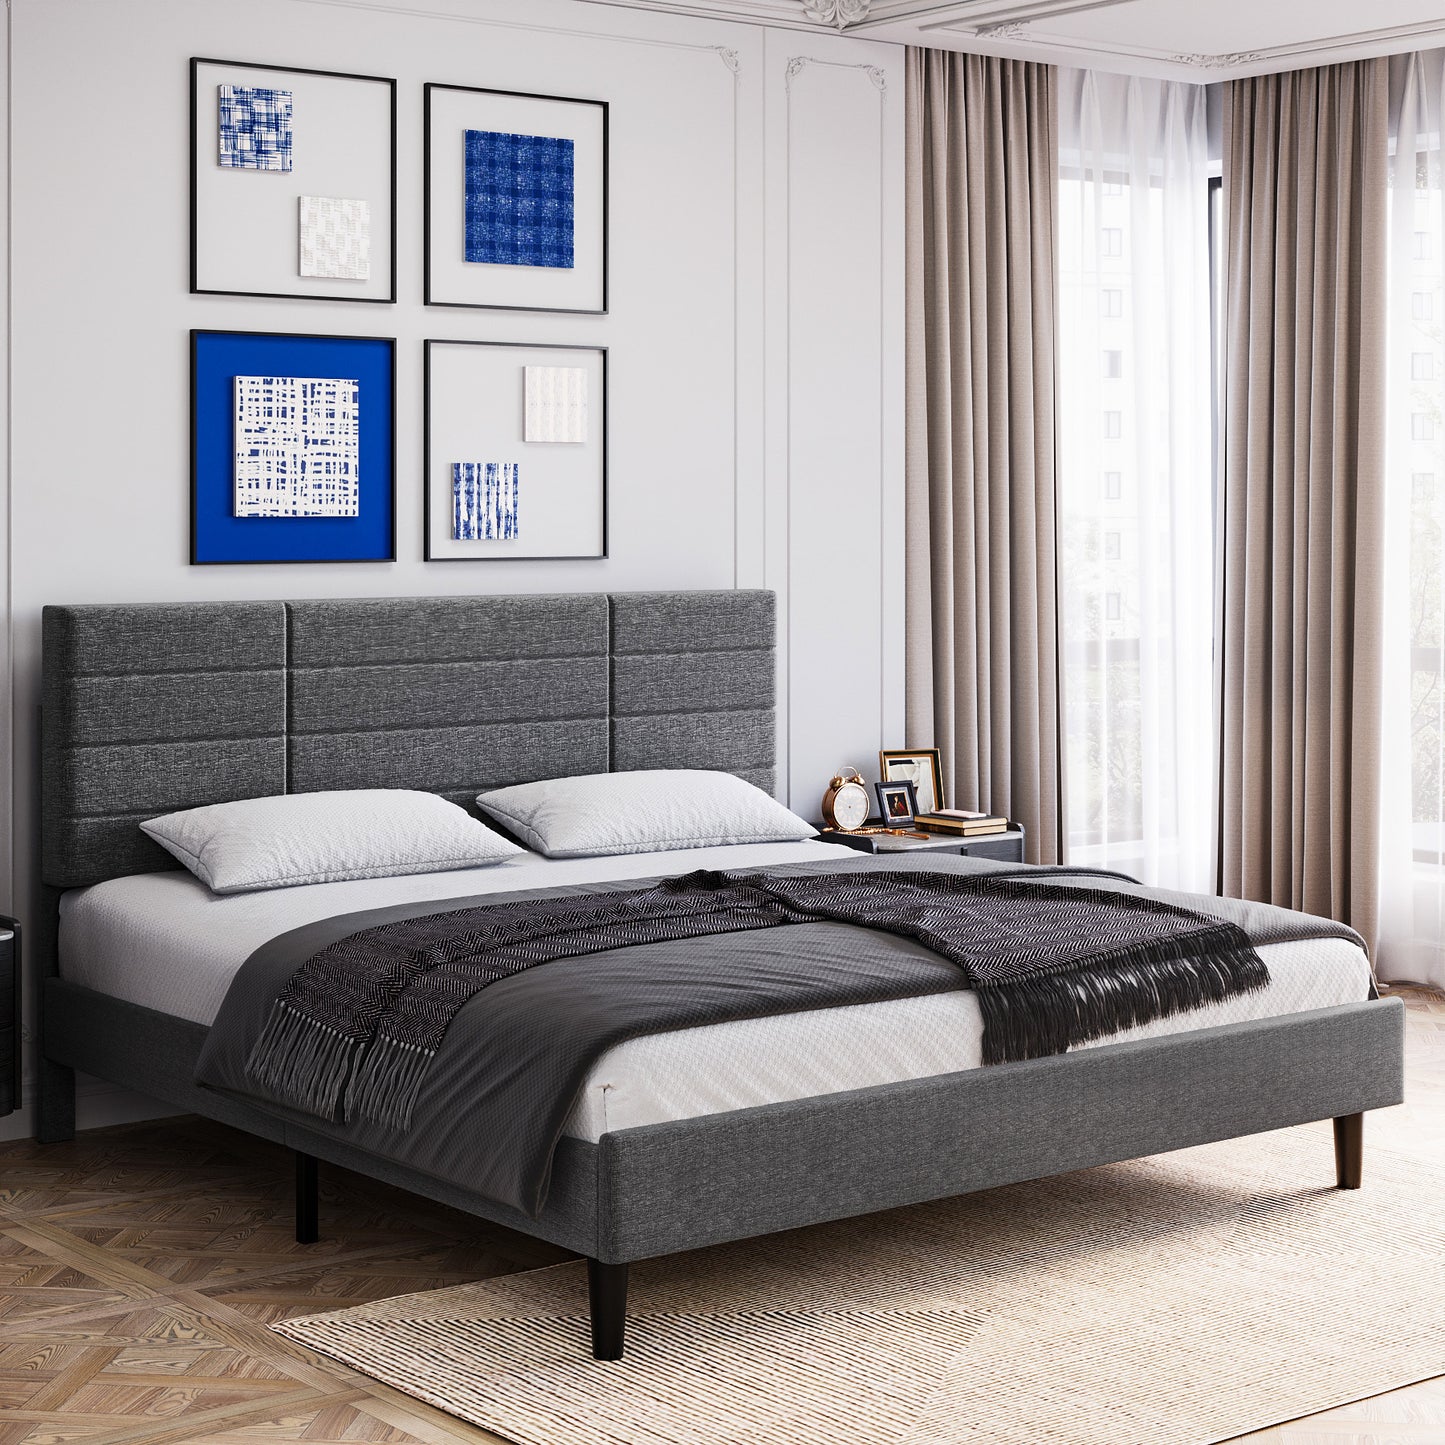 Molblly King Size Platform Bed Frame with Upholstered Headboard, Strong Frame, and Wooden Slats Support, Non-Slip, and Noise-Free, No Box Spring Needed, Easy Assembly, Dark Grey